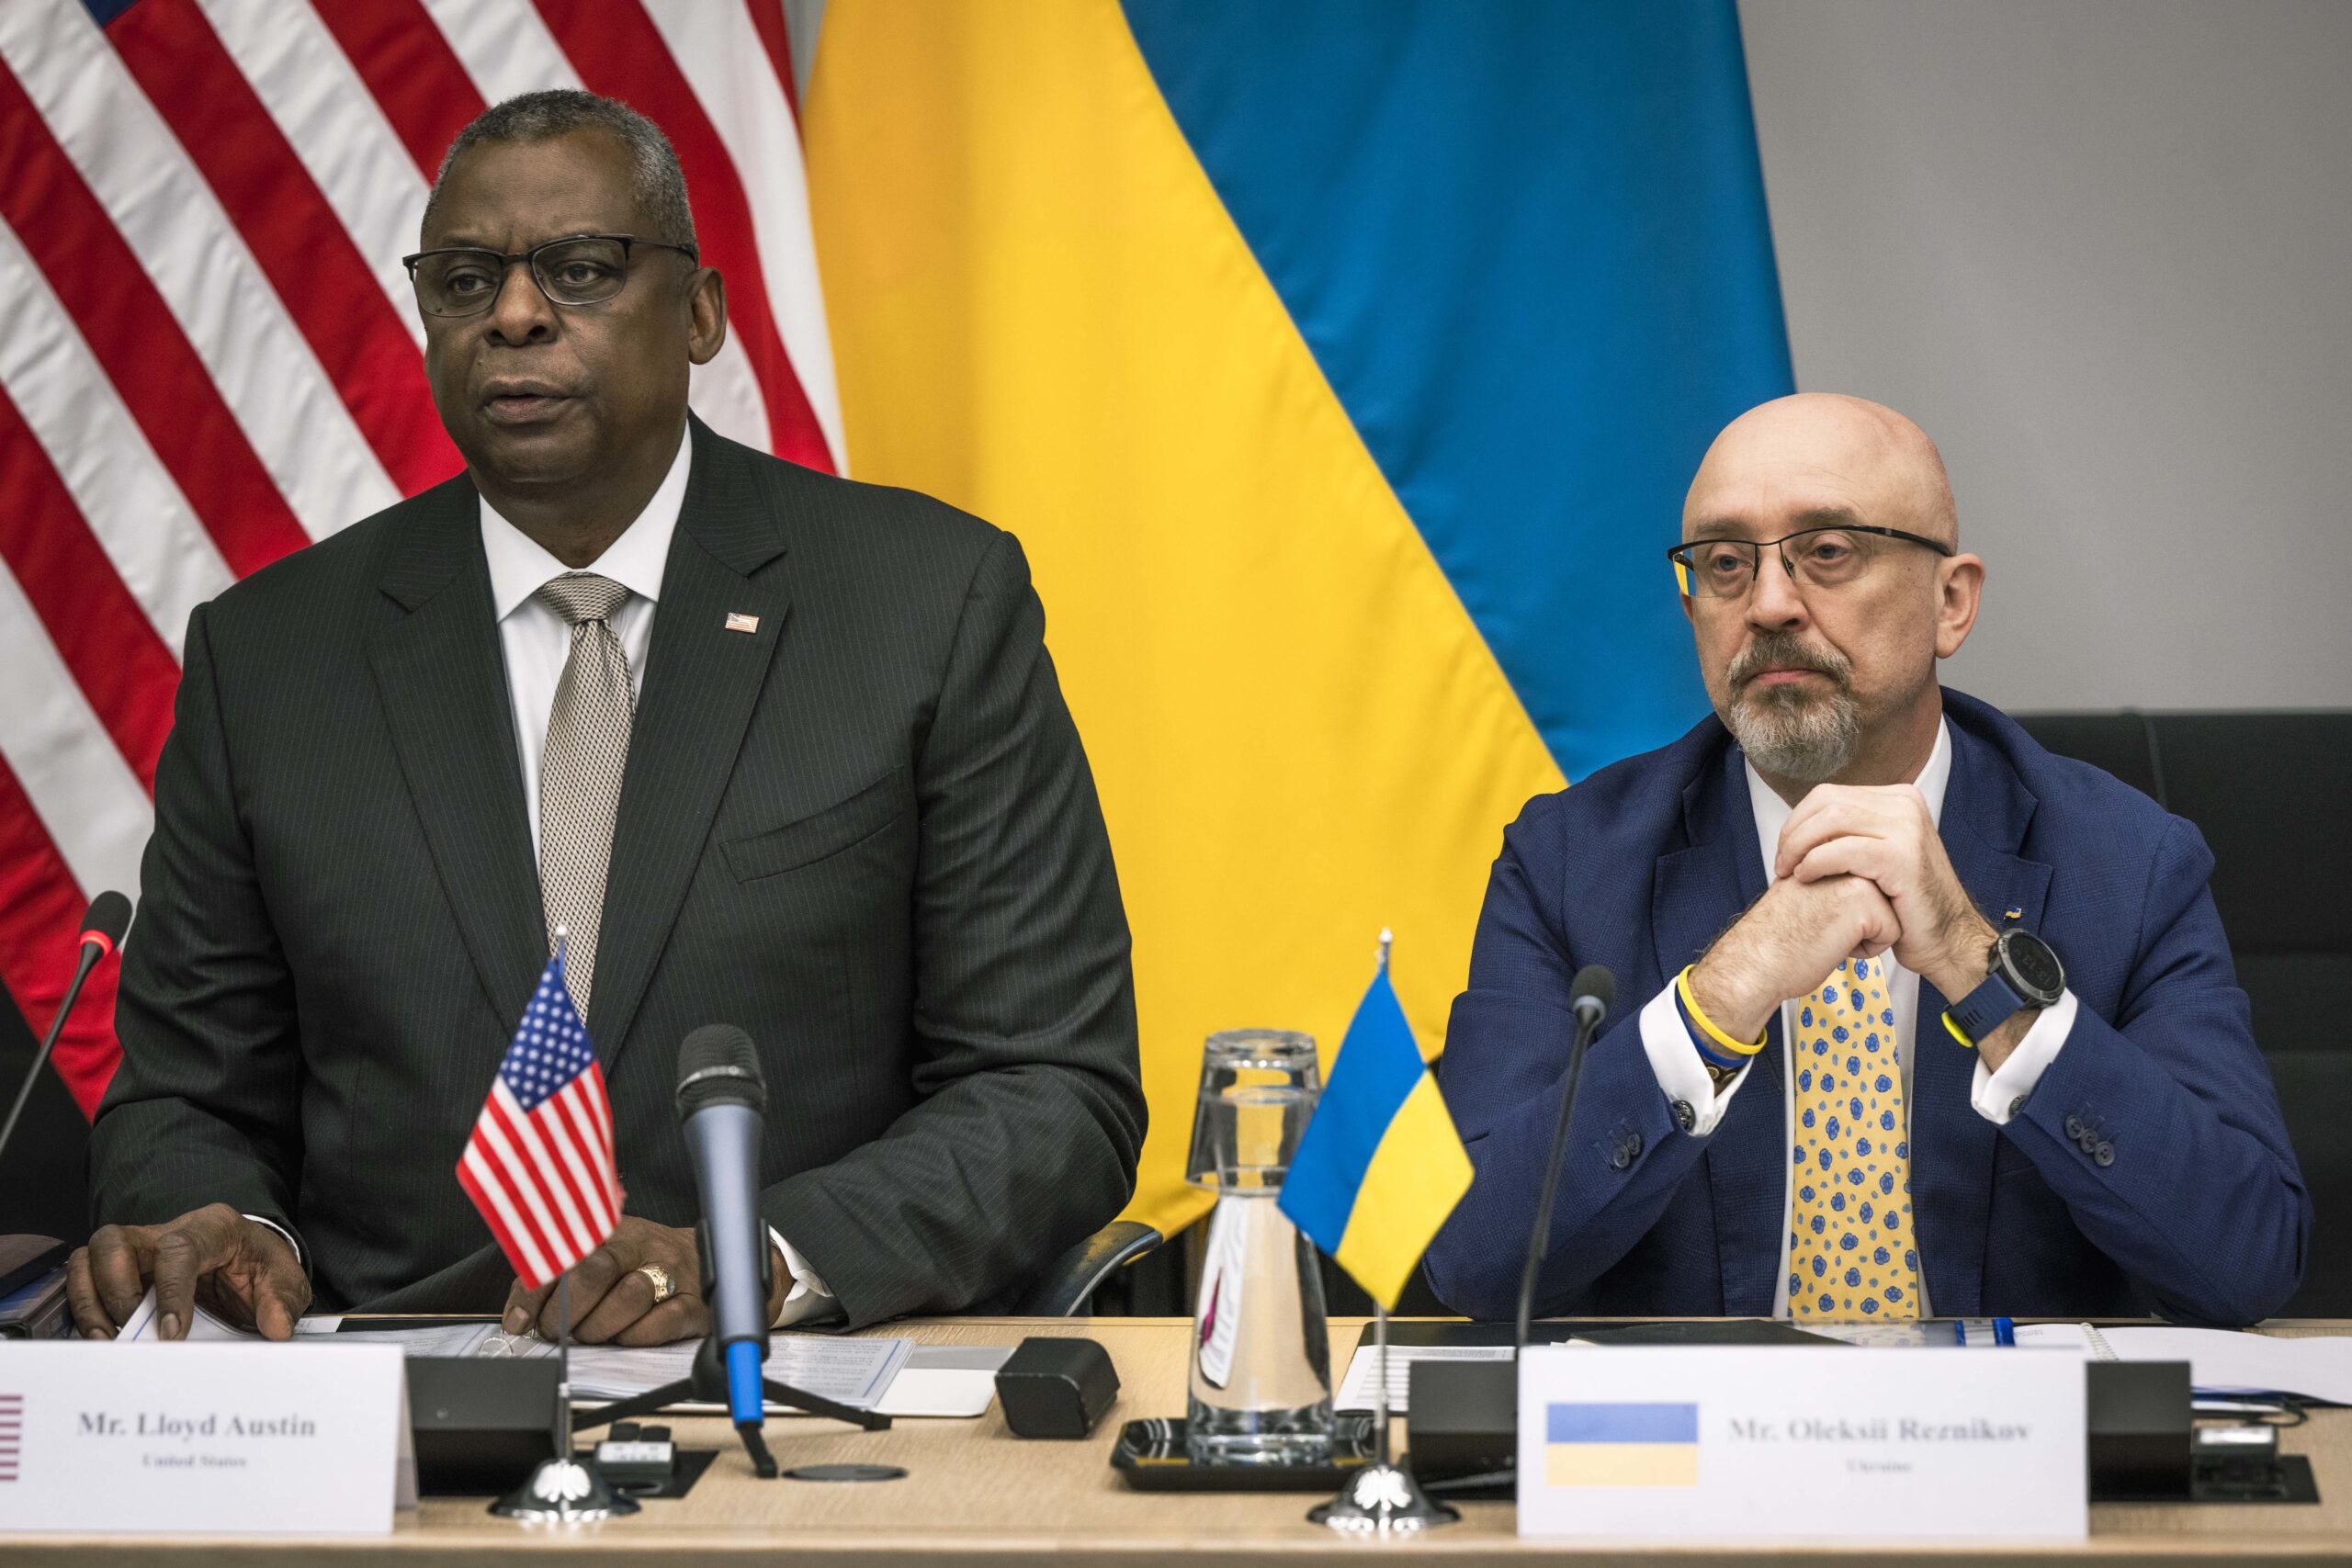 File photo of Lloyd J. Austin III and Oleksii Reznikov seated at table, with U.S. and Ukrainian Flags Behind, adapted from image at defense.gov with photo credit to DOD and Chad J. McNeeley)